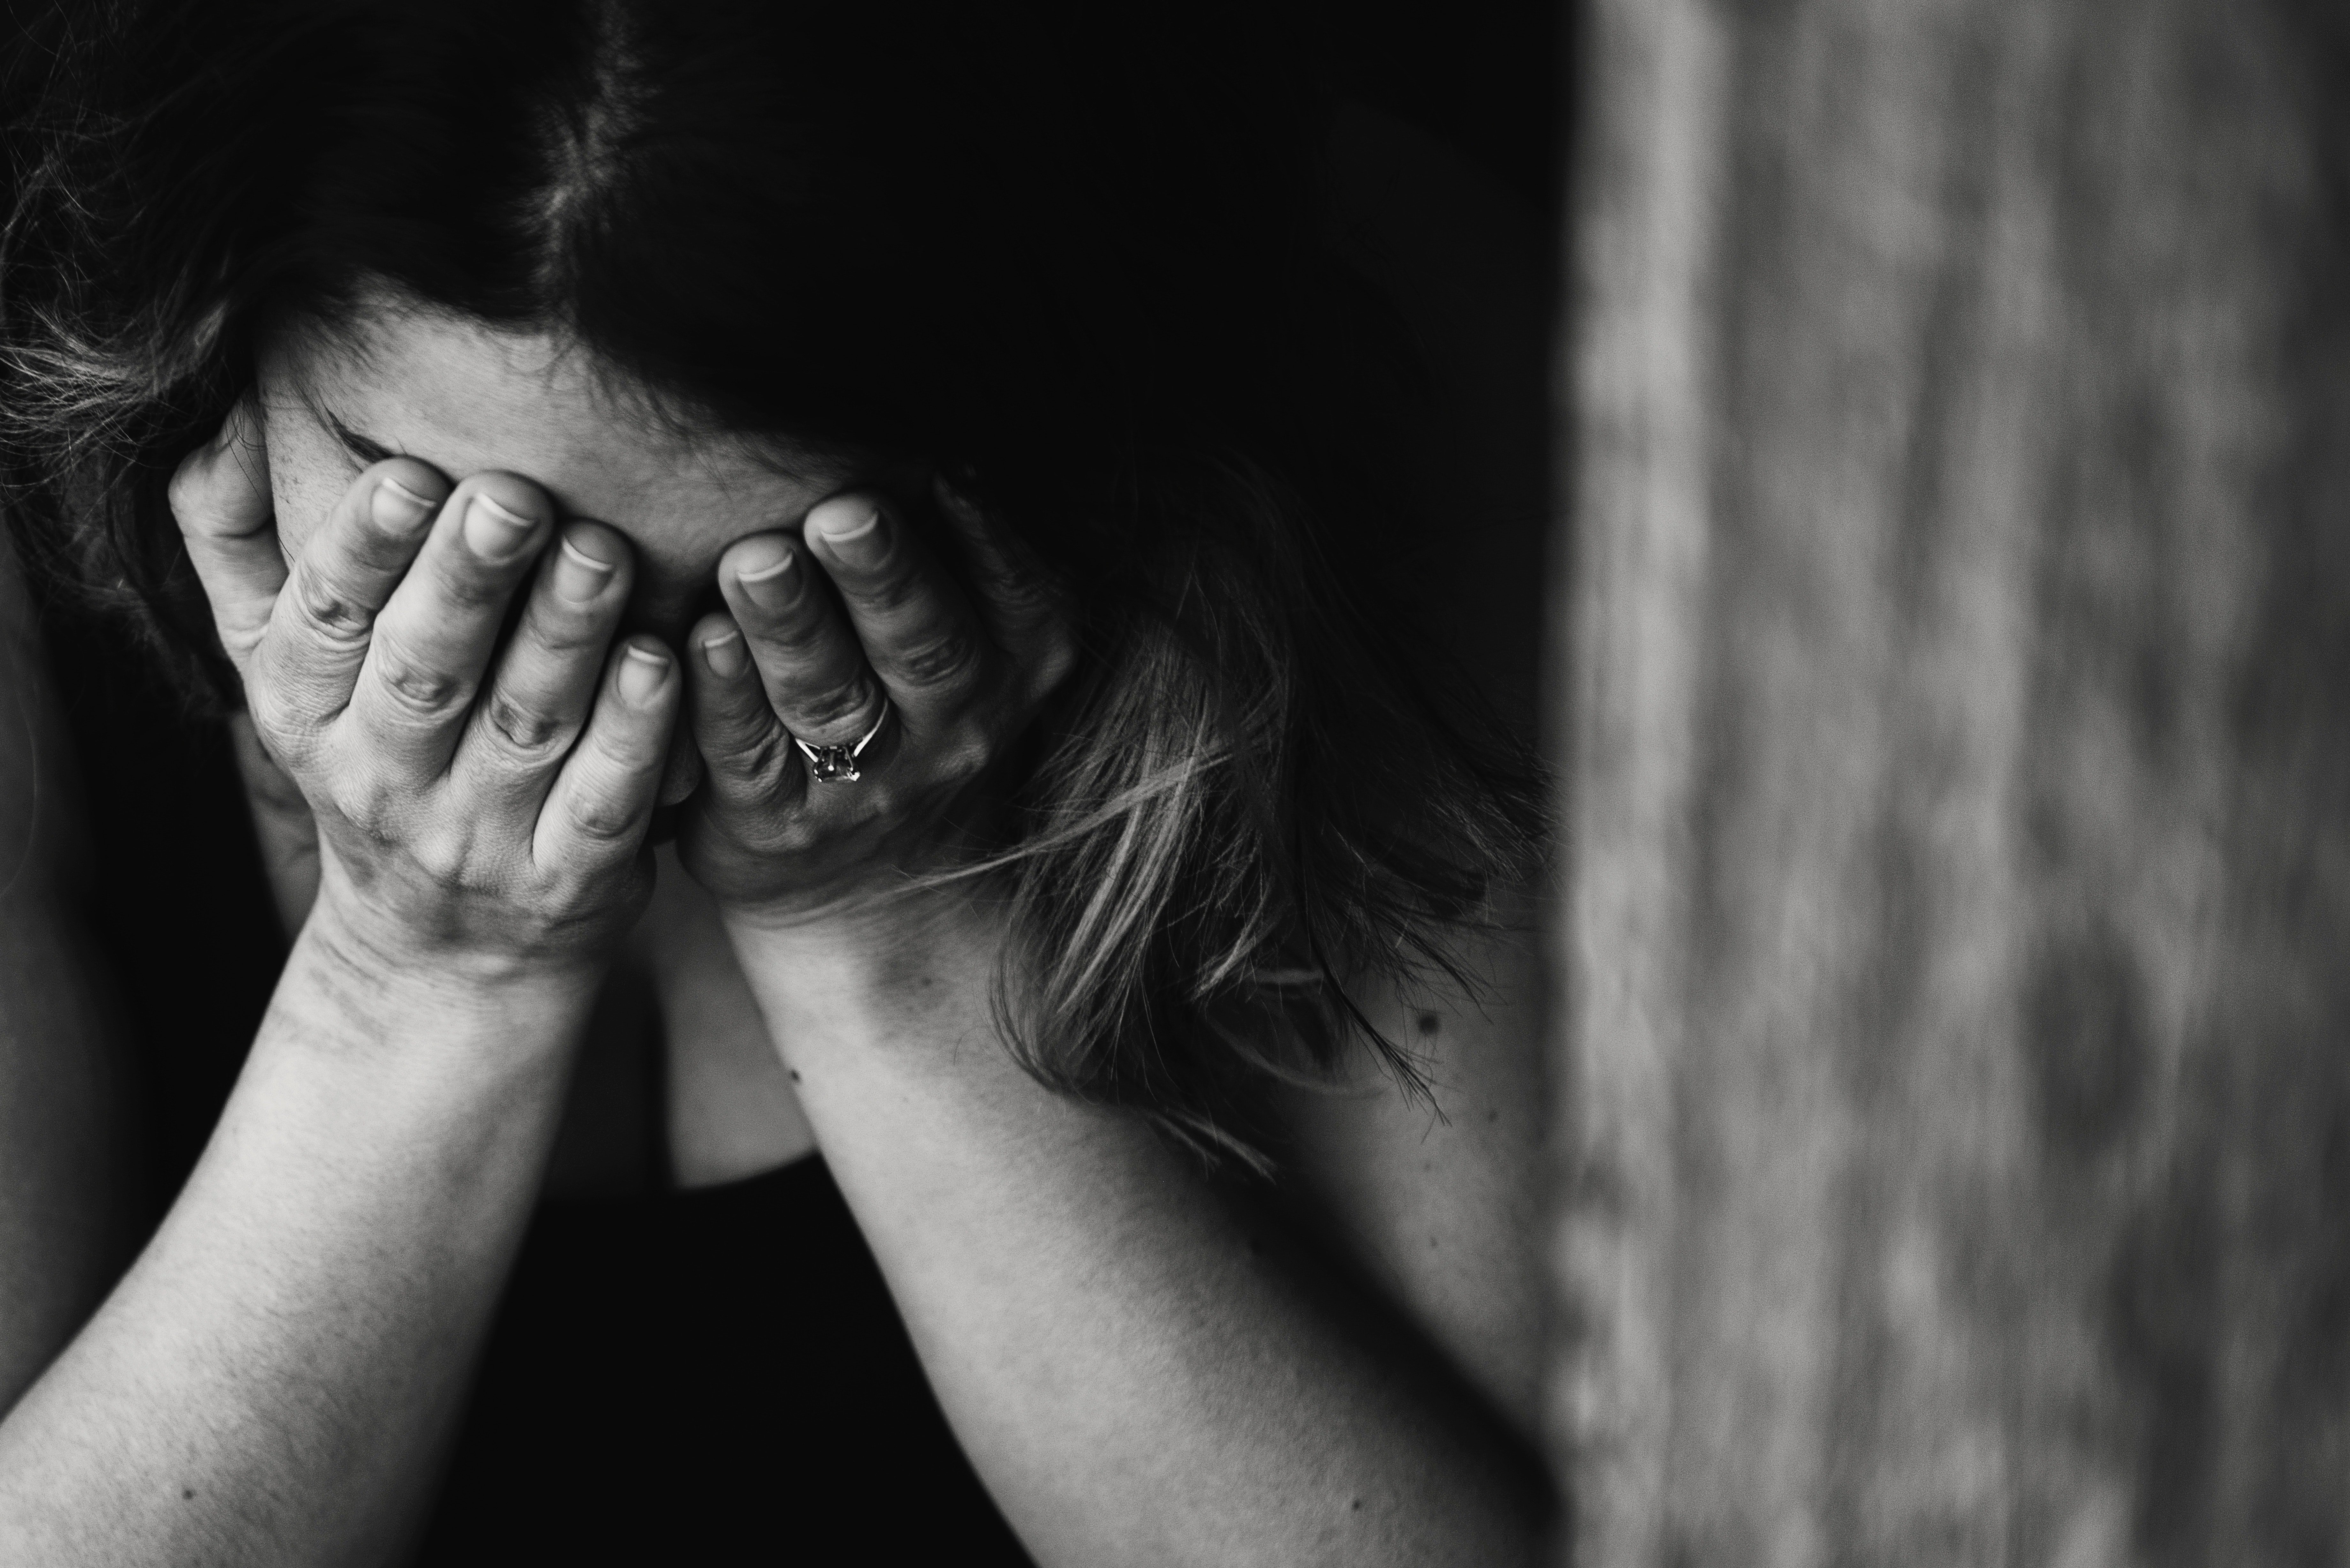 Emily cried after realizing her husband didn't think she was beautiful anymore. | Source: Pexels